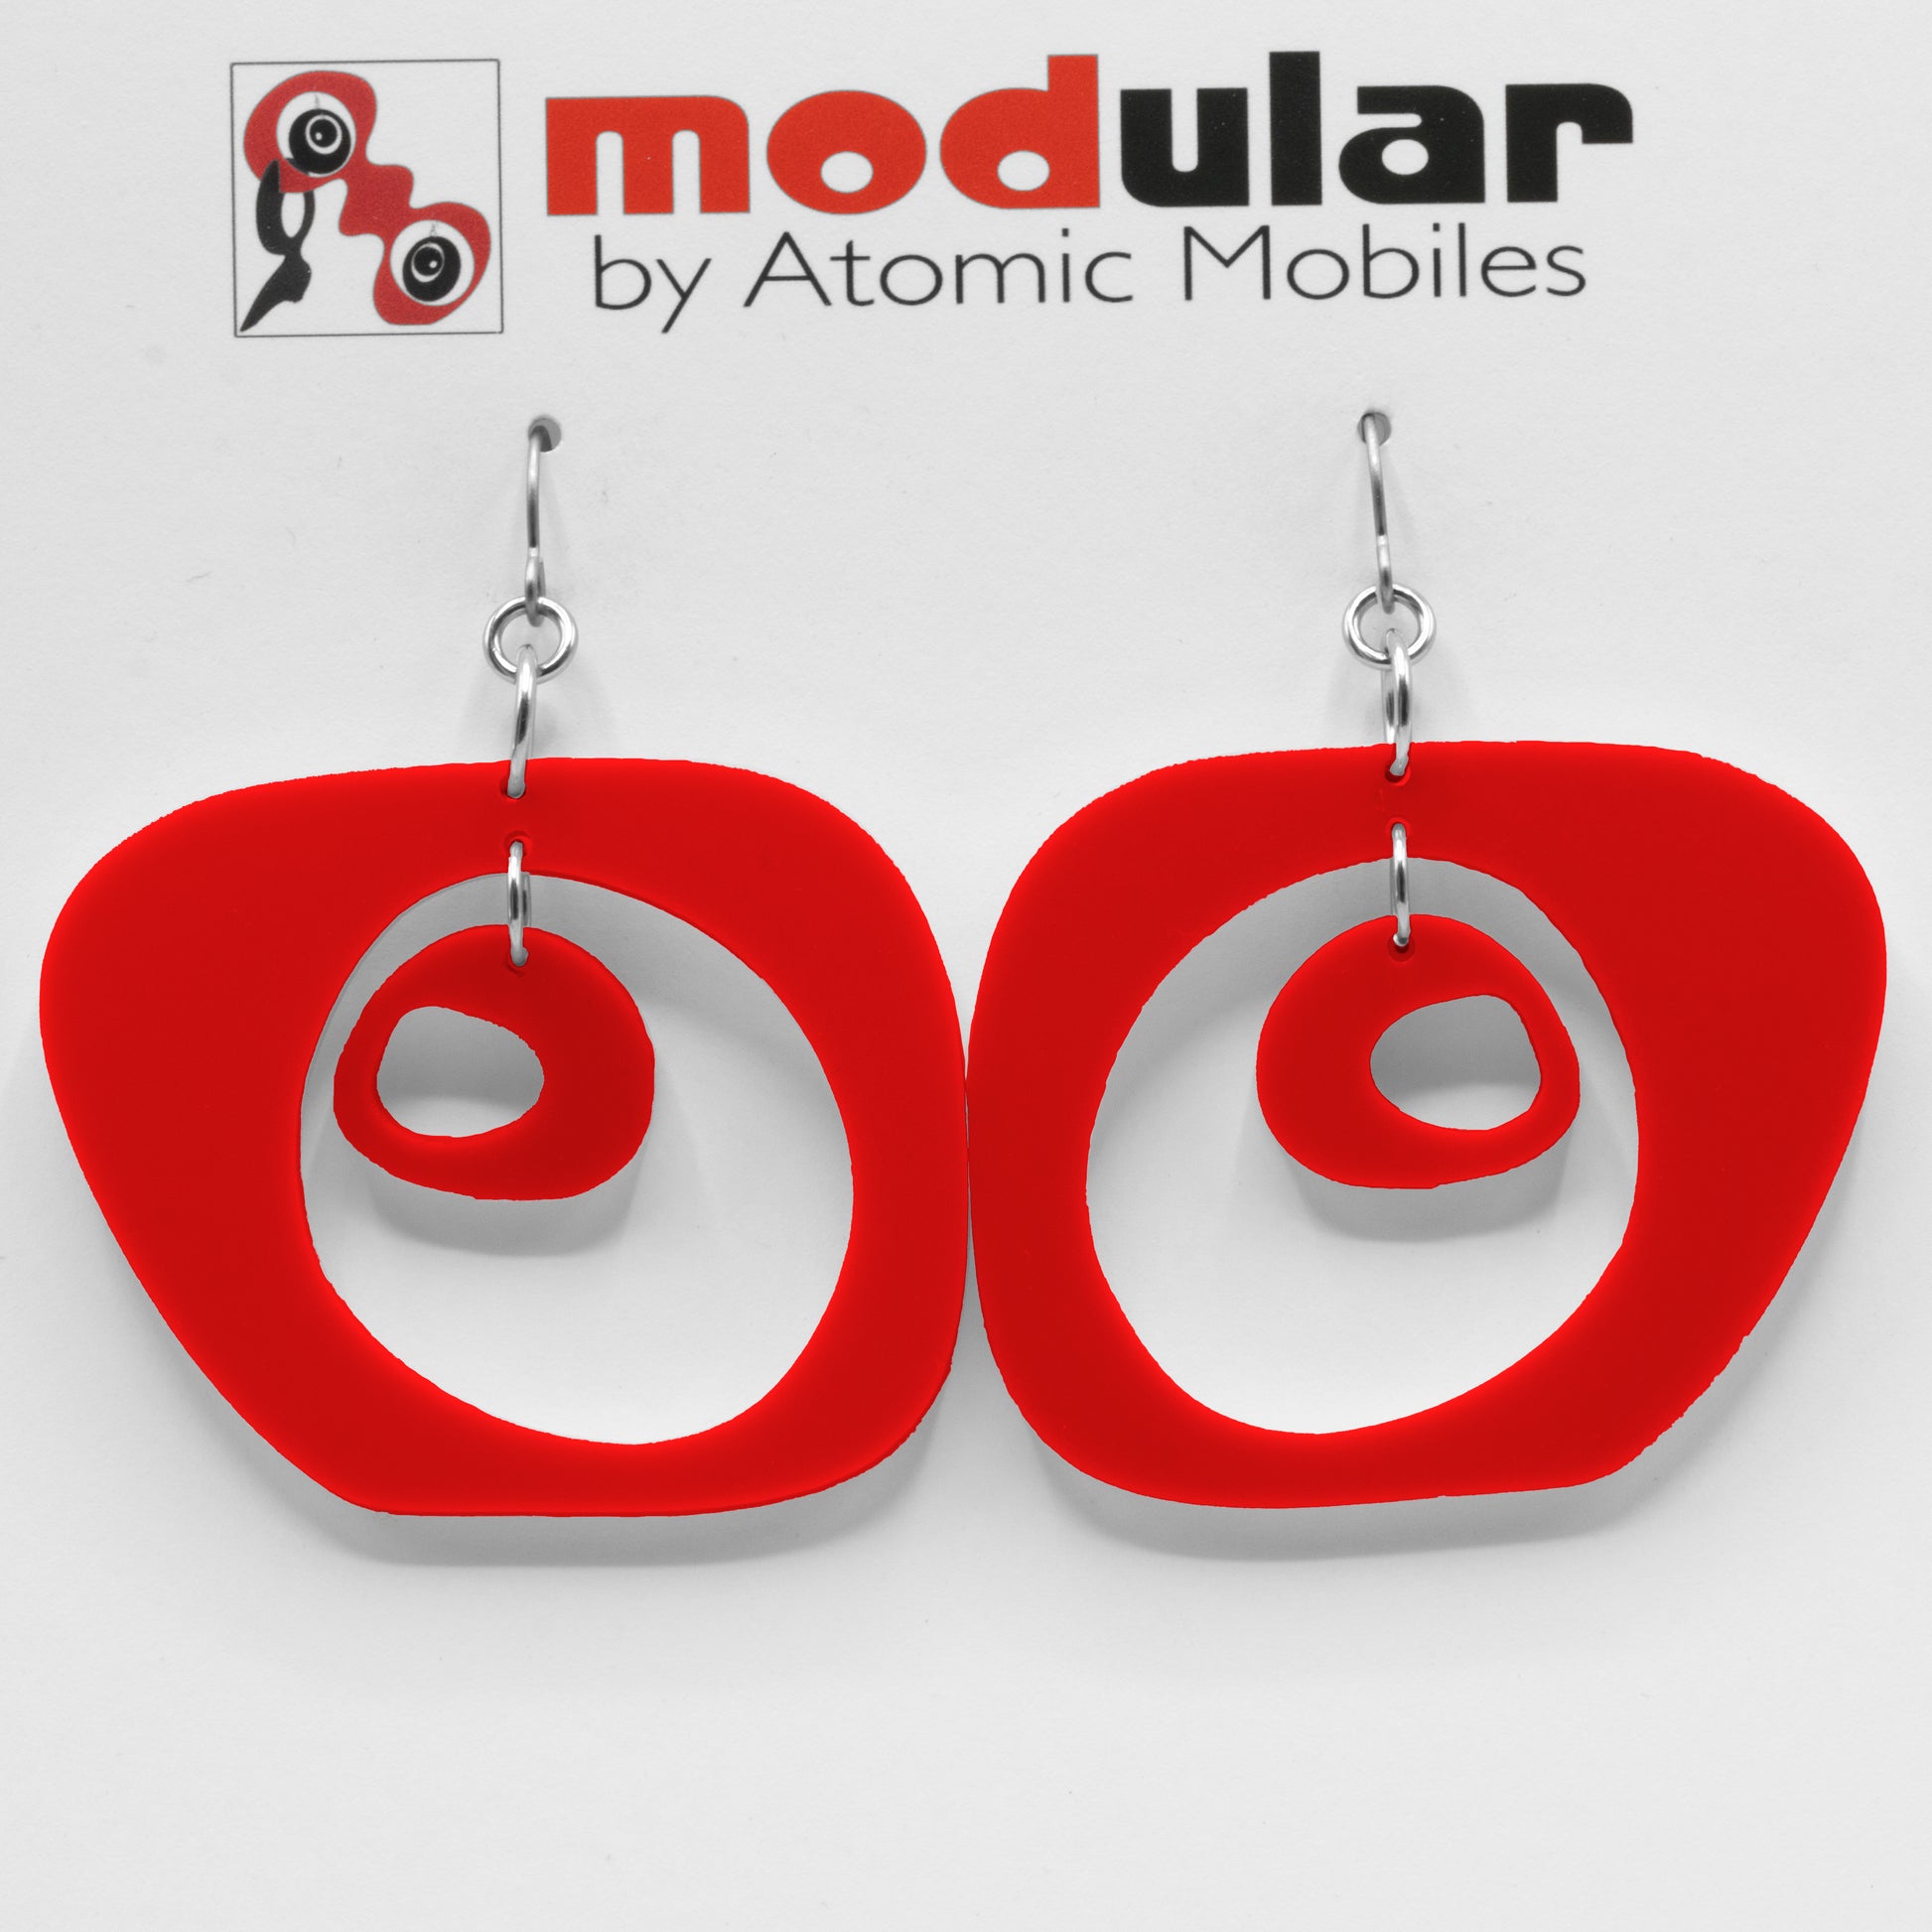 Paris Statement Earrings in Red - modern fashion inspired dangle earrings - handmade mod jewelry by AtomicMobiles.com